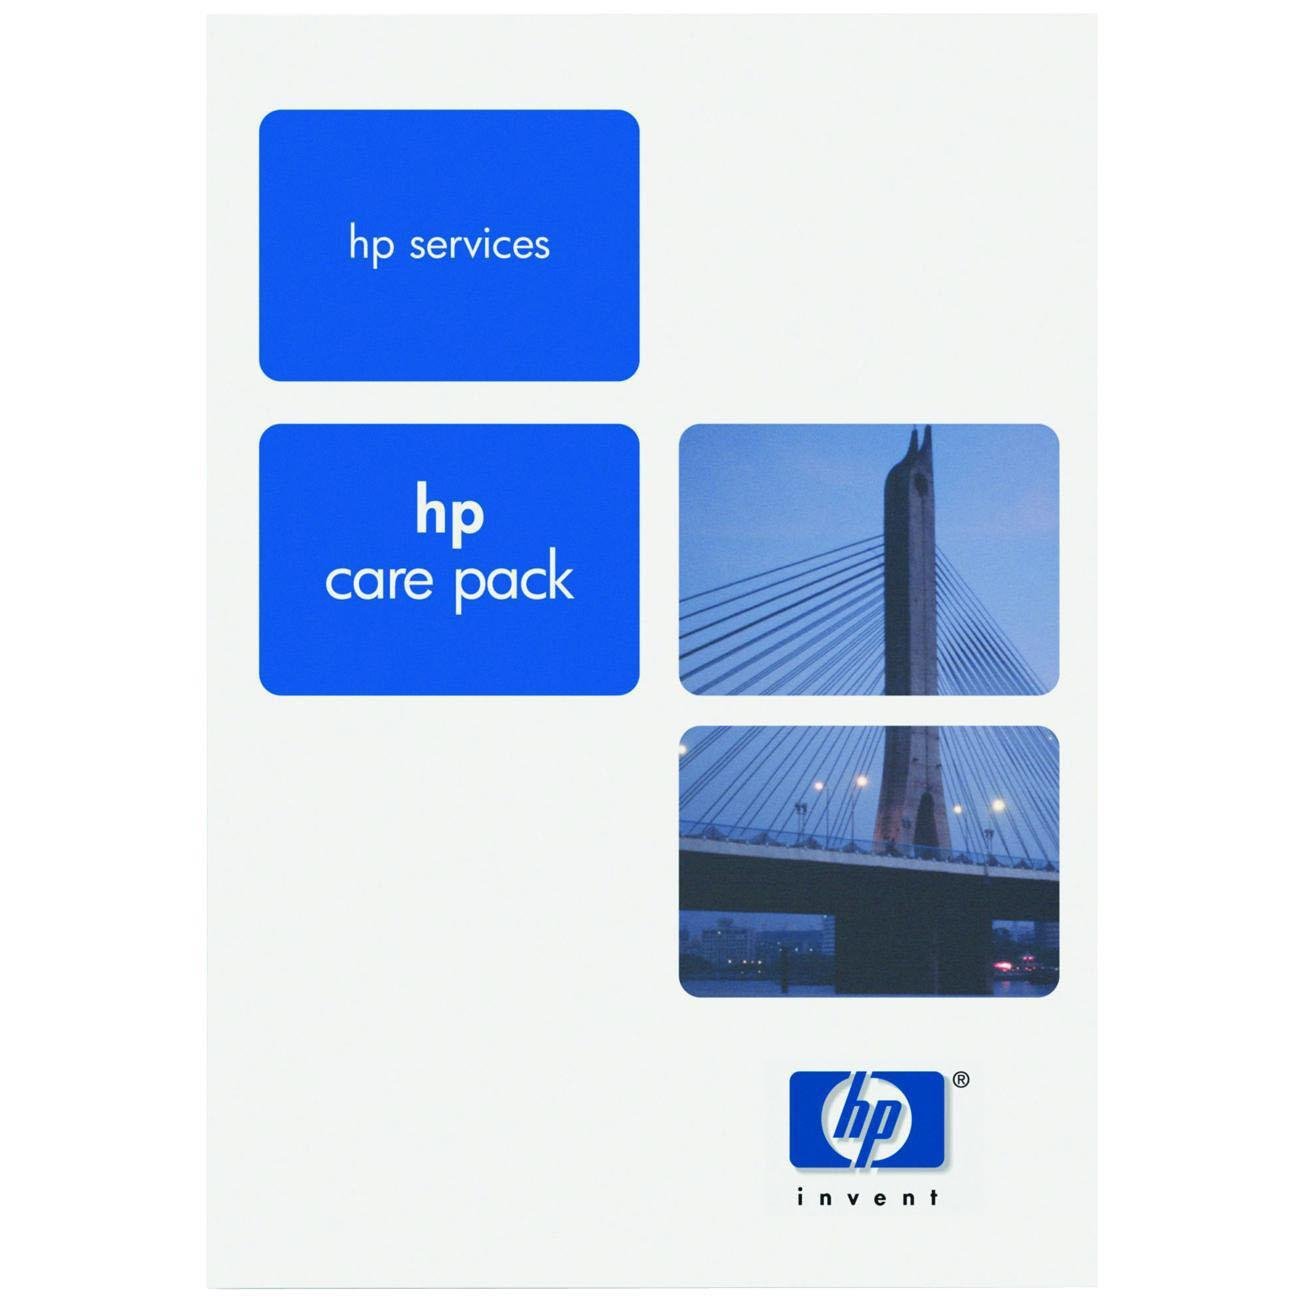 HP Care Pack Hardware Support - 1 Year Extended Service - Service